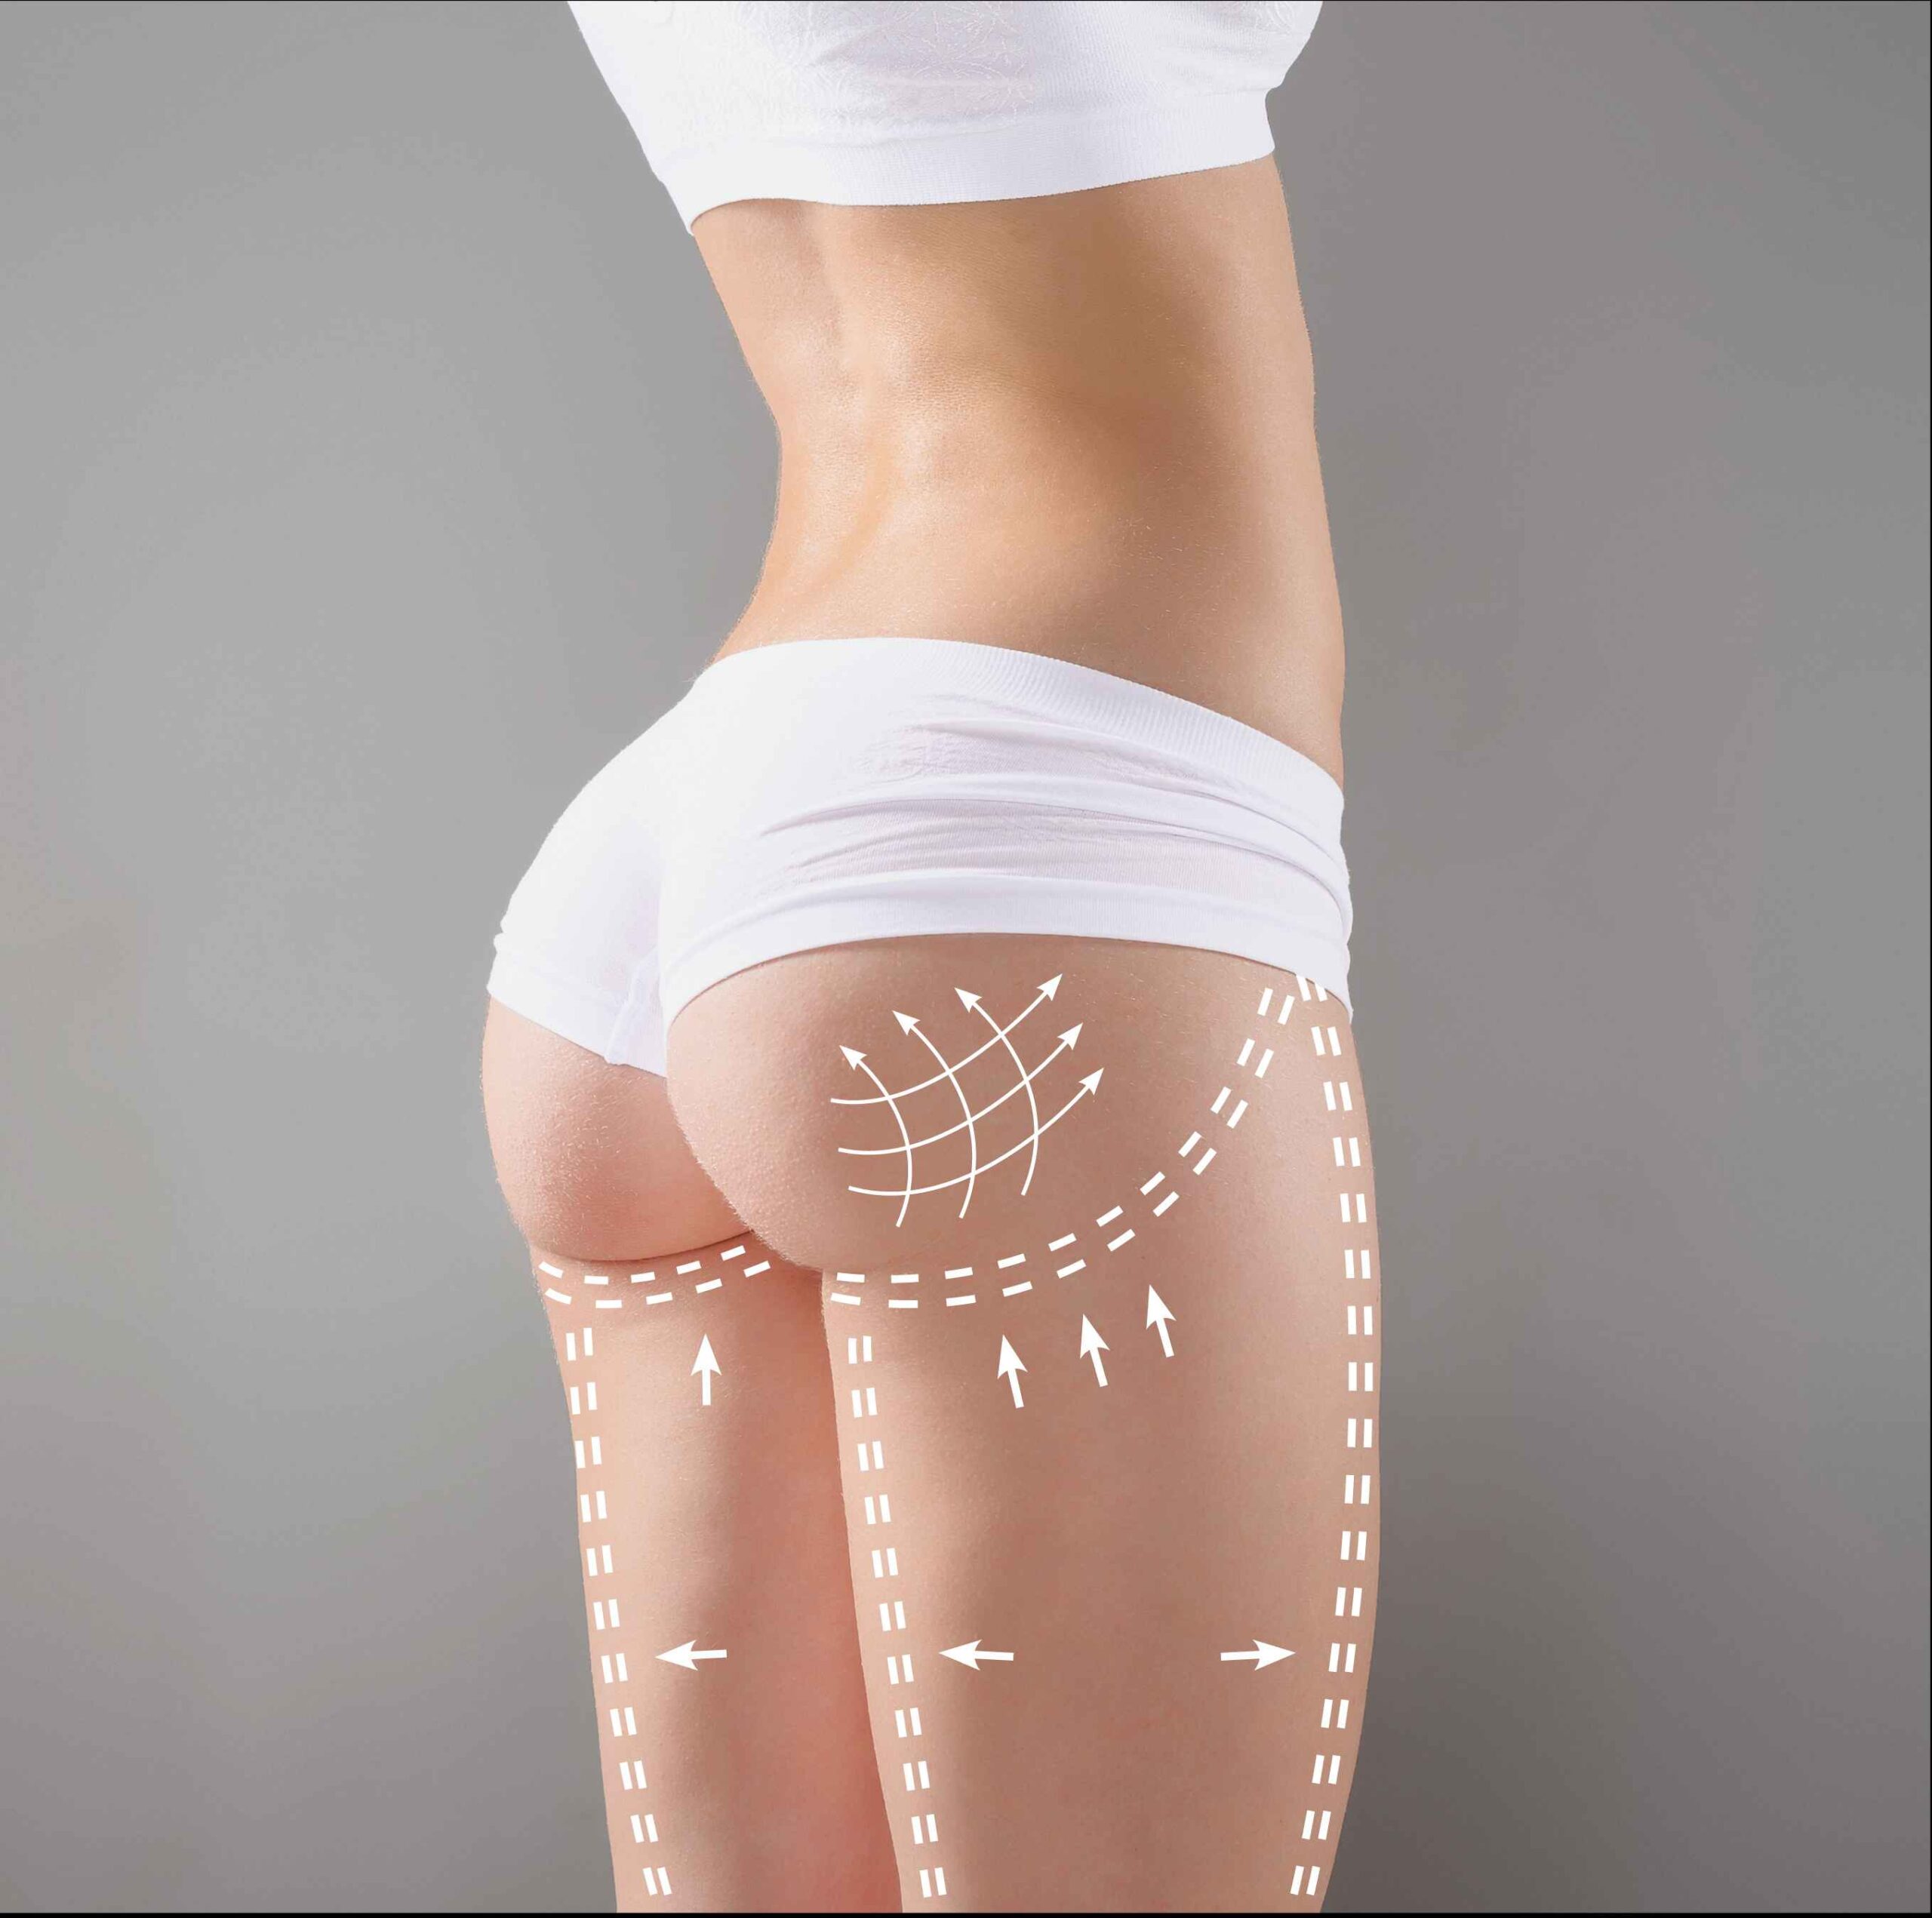 Non Surgical bbl | New Look Skin Center Medical Spa in Glendale, Encino and Irvine, CA